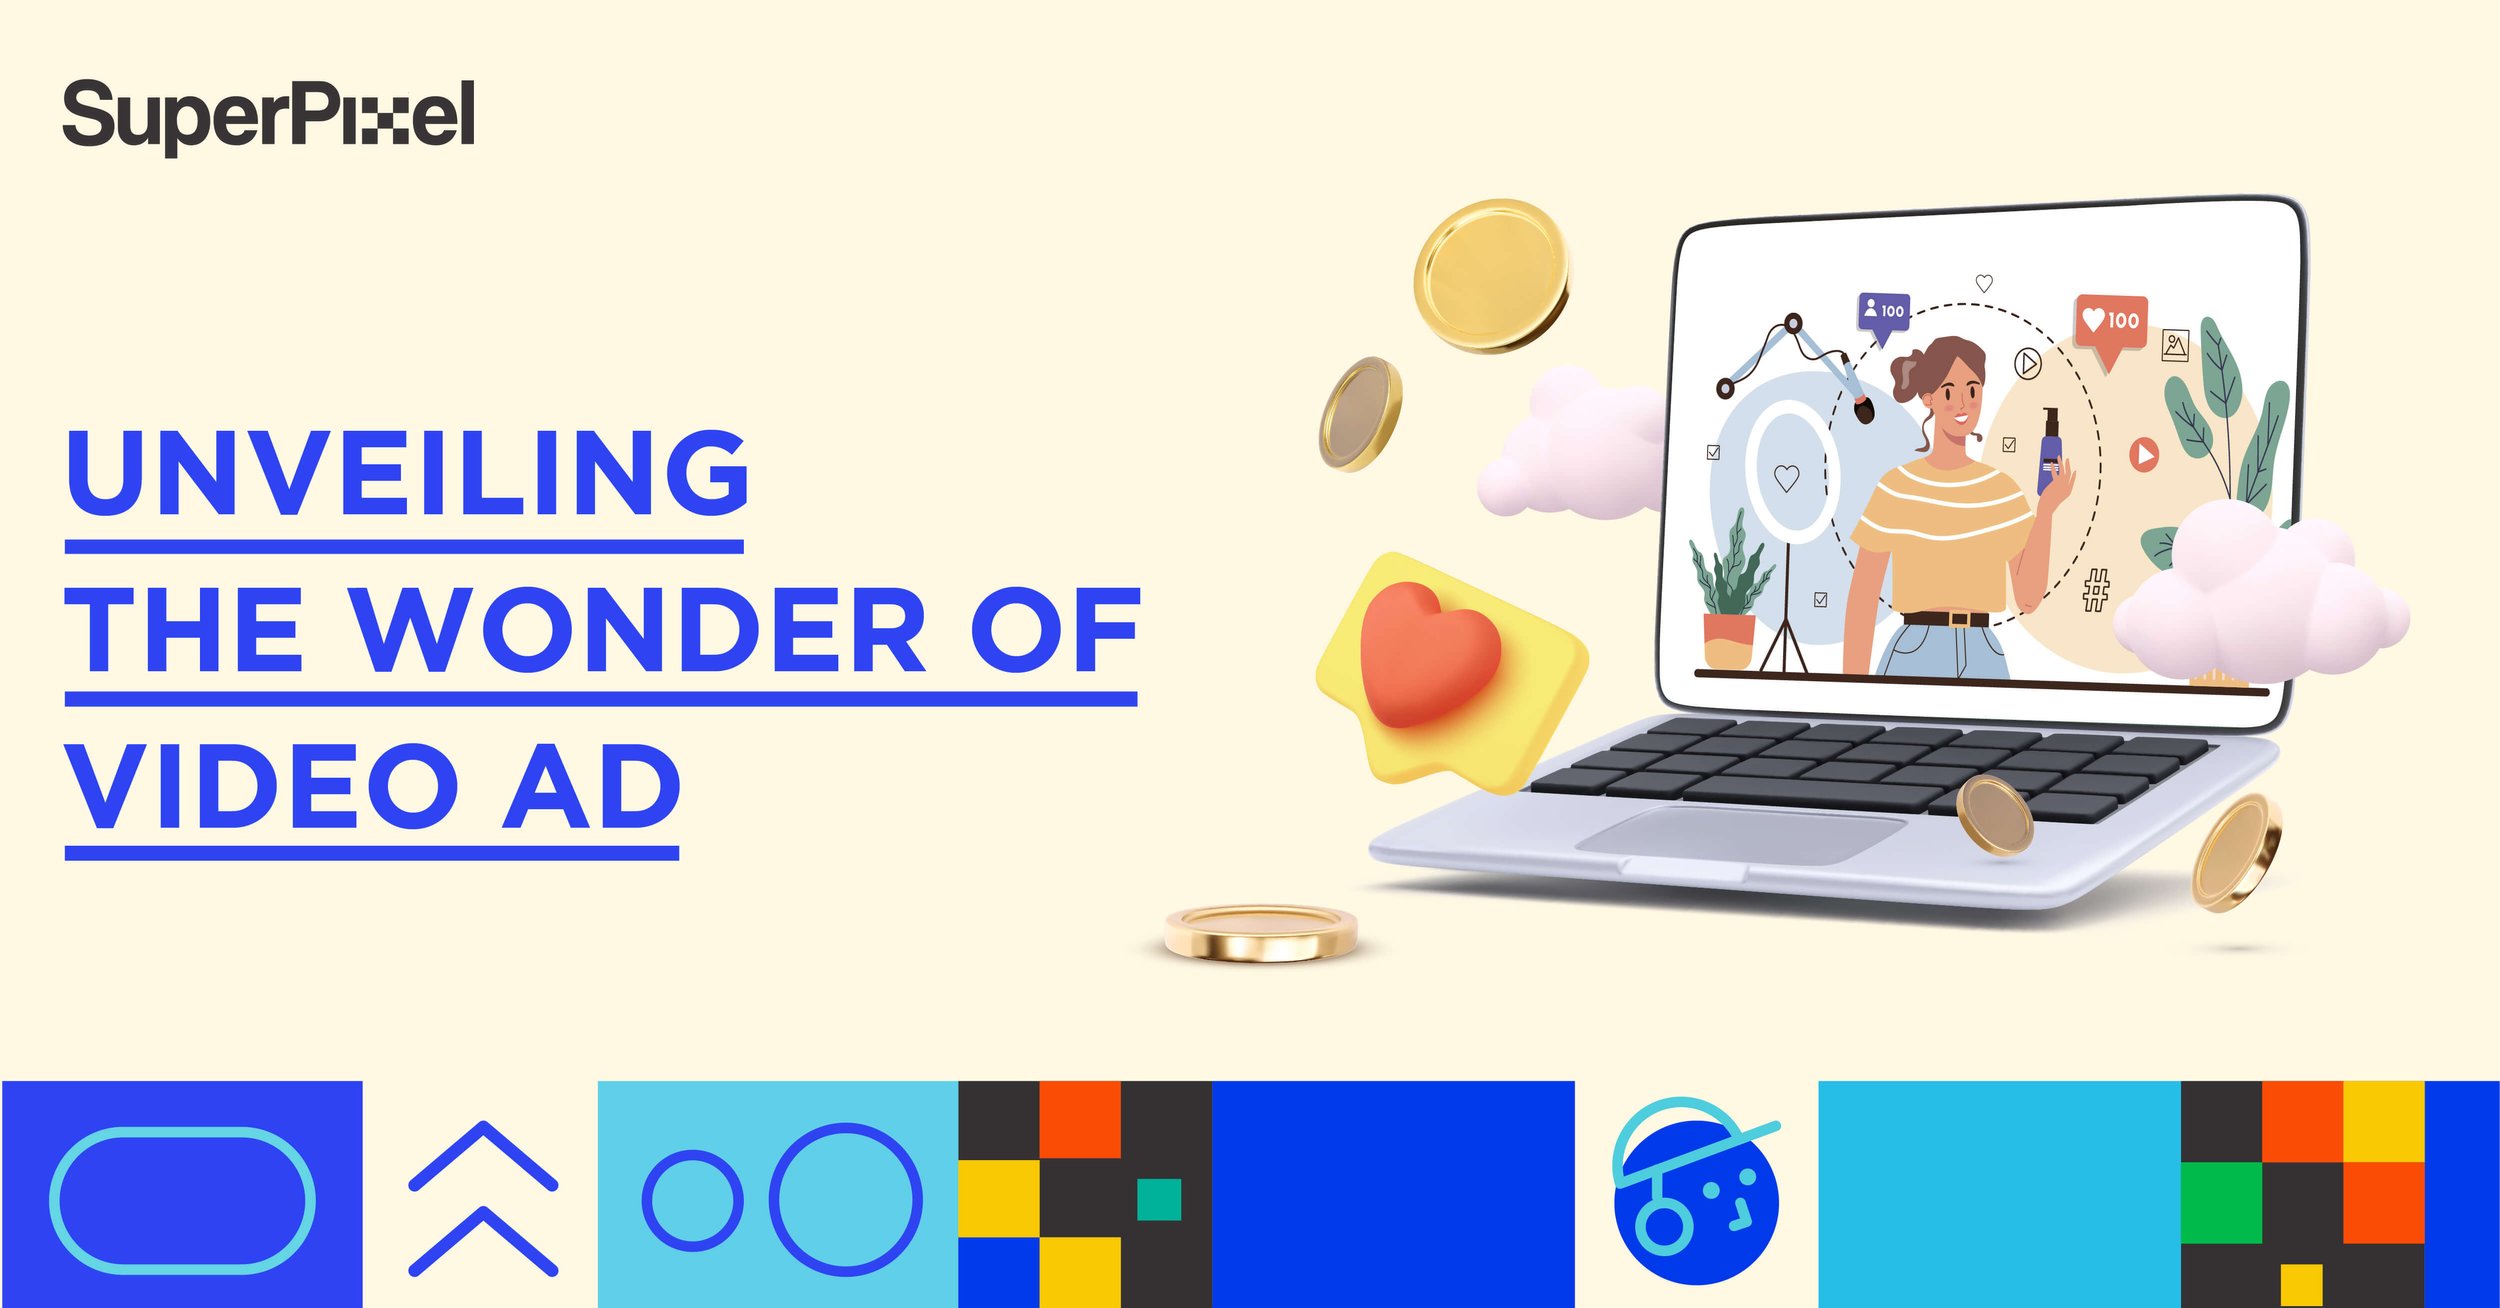 Let's Unveiling the Wonder of Video Ad!